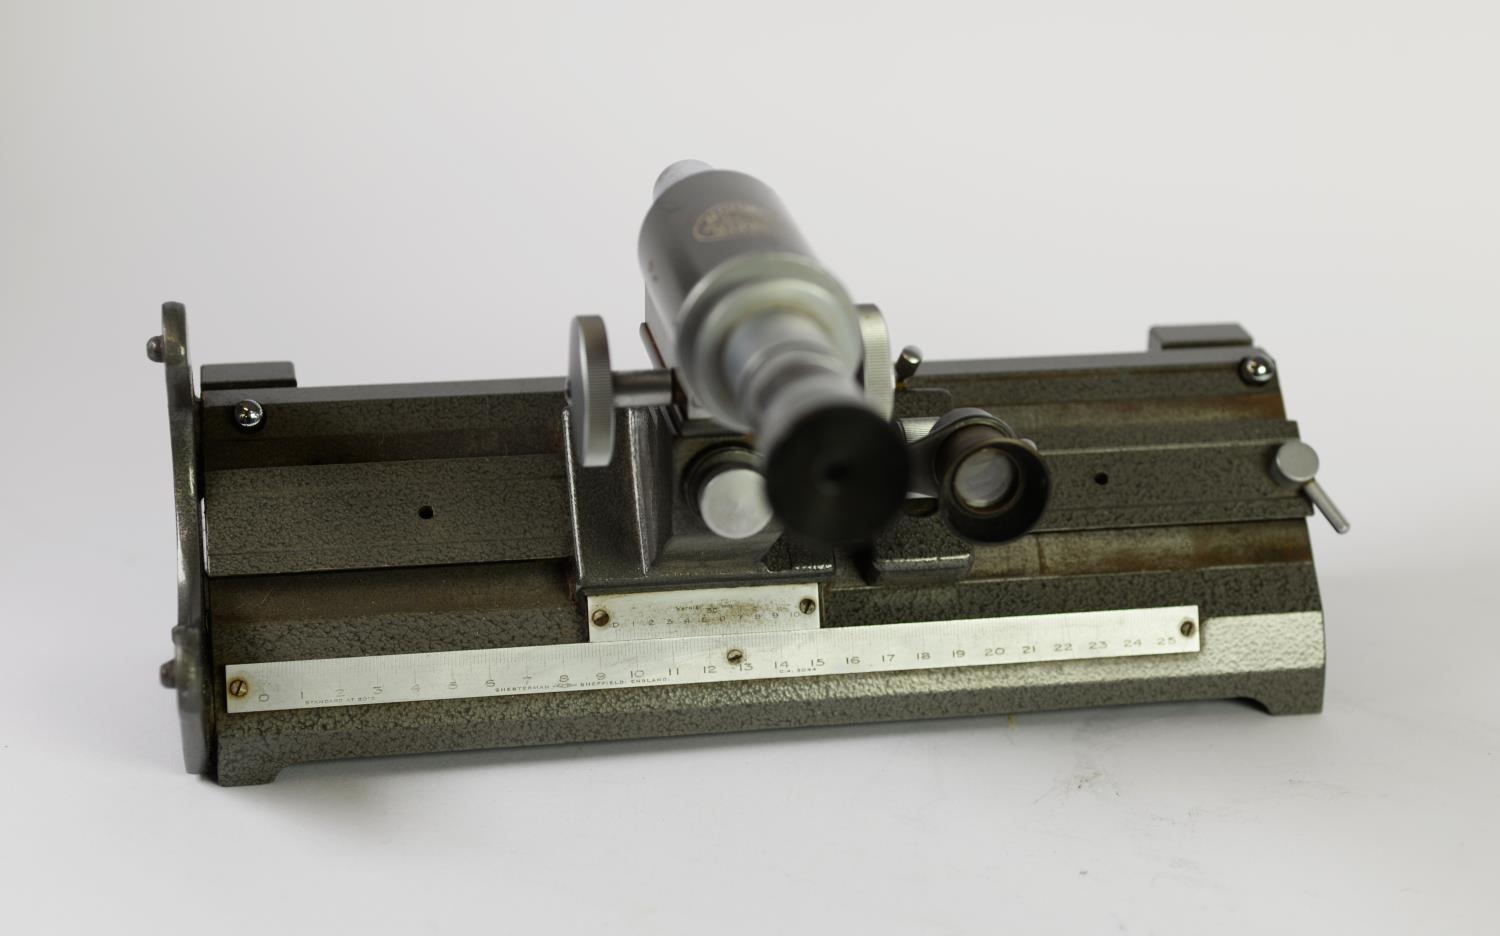 C. BAKER, LONDON, TRAVELLING PRECISION ENGINEERING VERNIER, MICROSCOPE, heavy cast metal with - Image 3 of 4